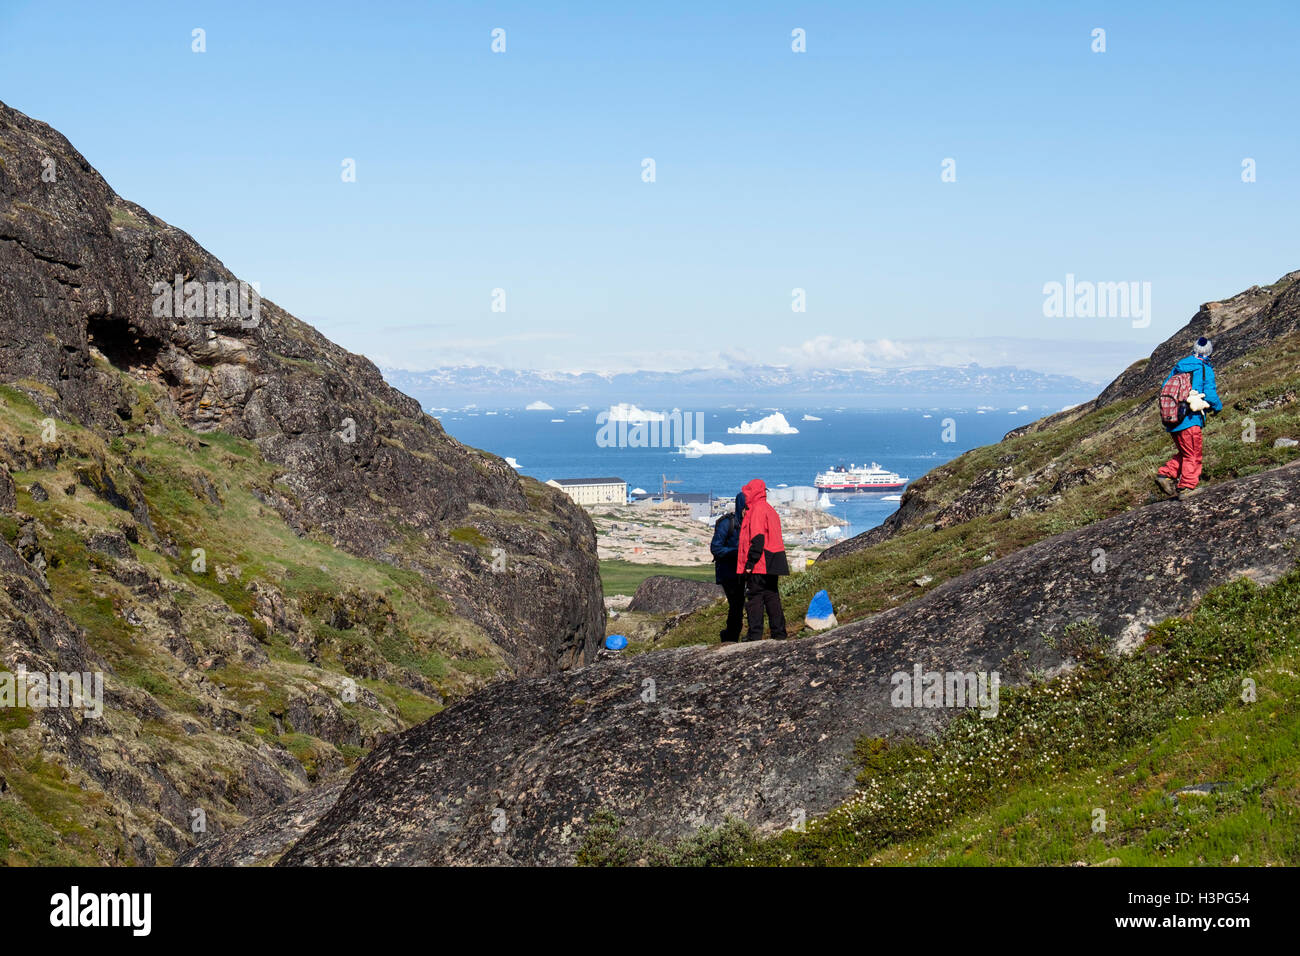 Blue route trail with people hiking to Ilulissat Iceford and Holms Bakke with town in distance below in summer 2016. Ilulissat, West Greenland Stock Photo